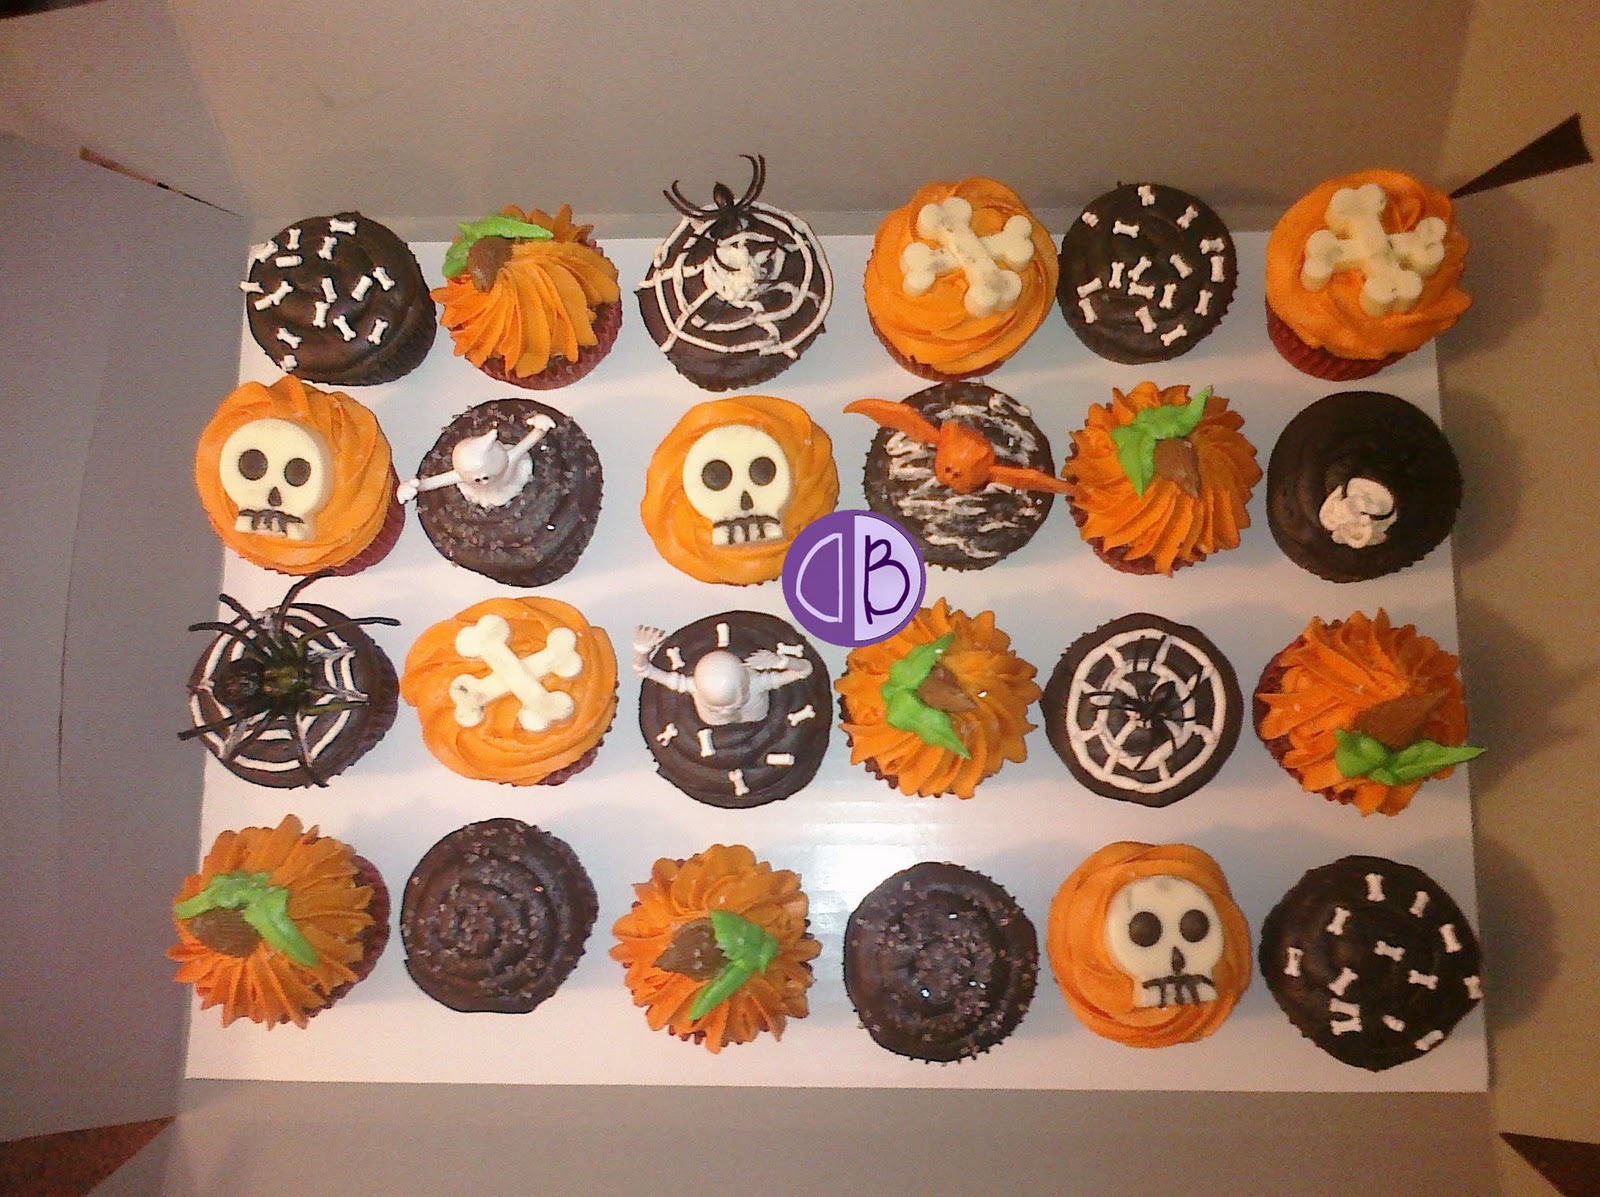 halloween pumpkin cupcakes Posted by Dorothy Booth at 9:23 AM